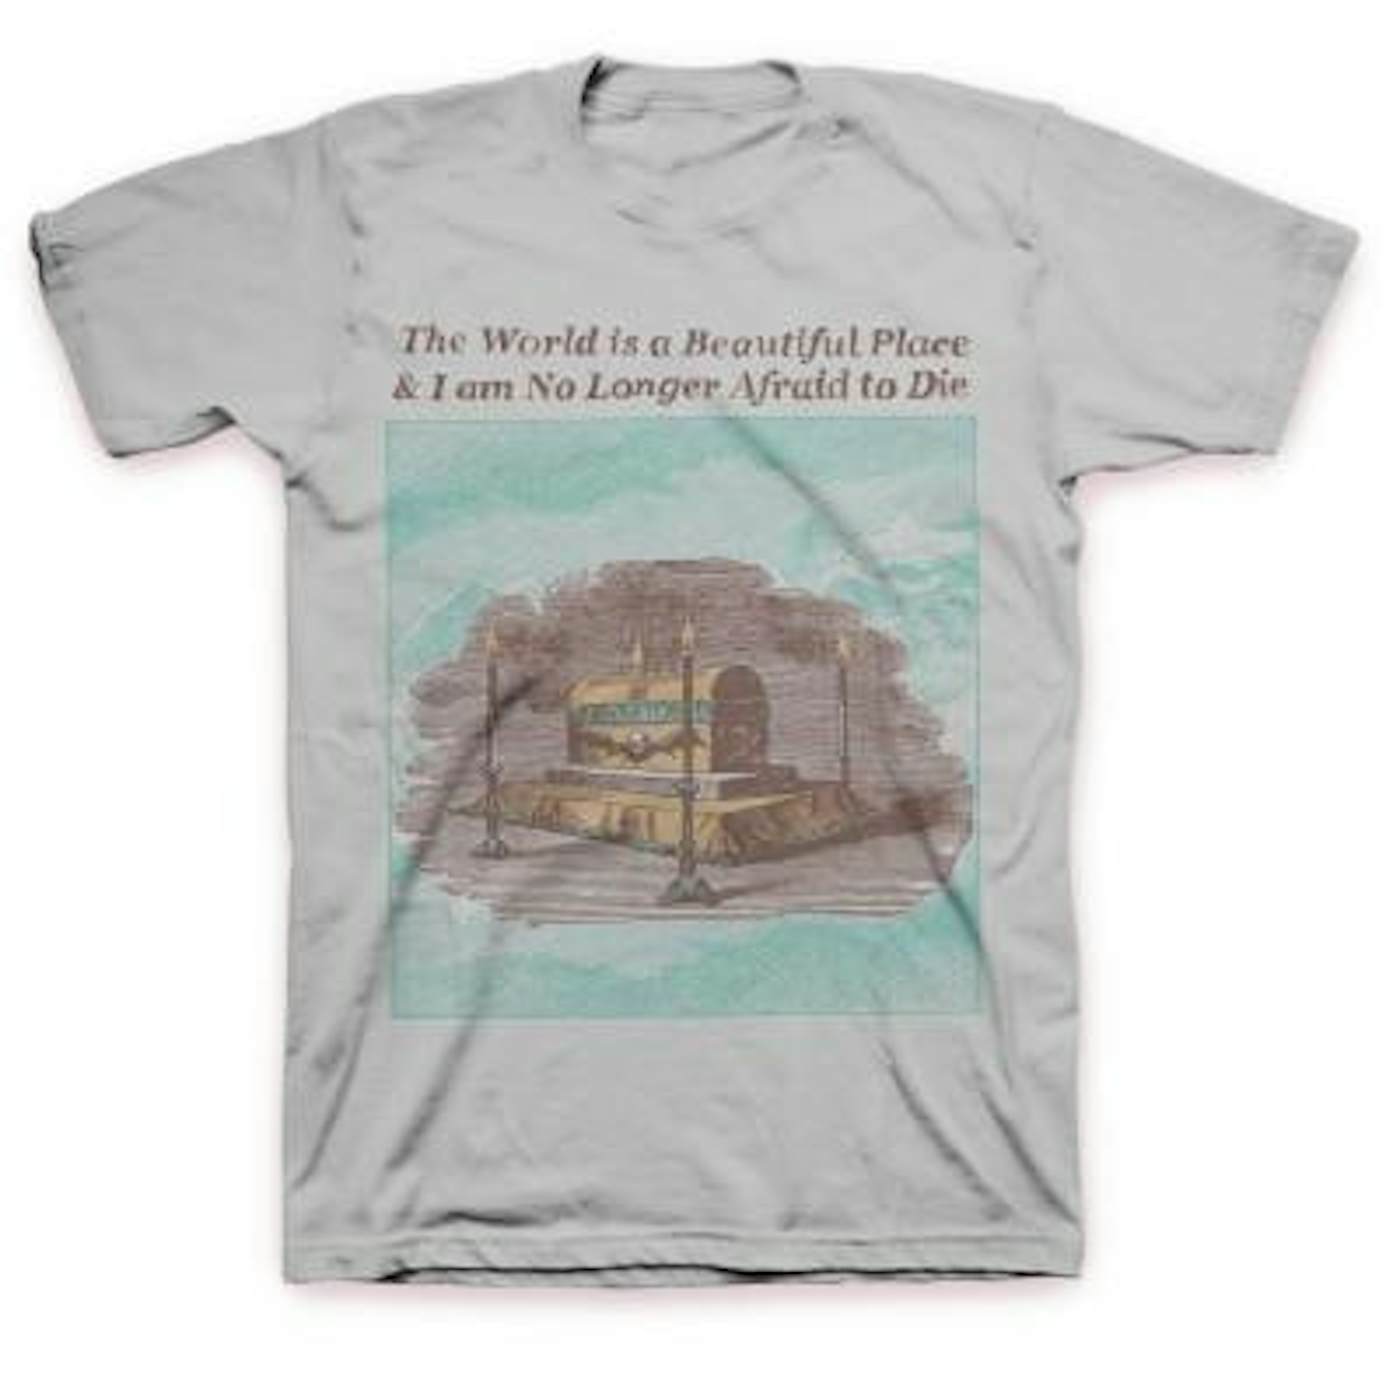 The World Is A Beautiful Place & I Am No Longer Afraid To Die Casket T-shirt (Ice Grey)